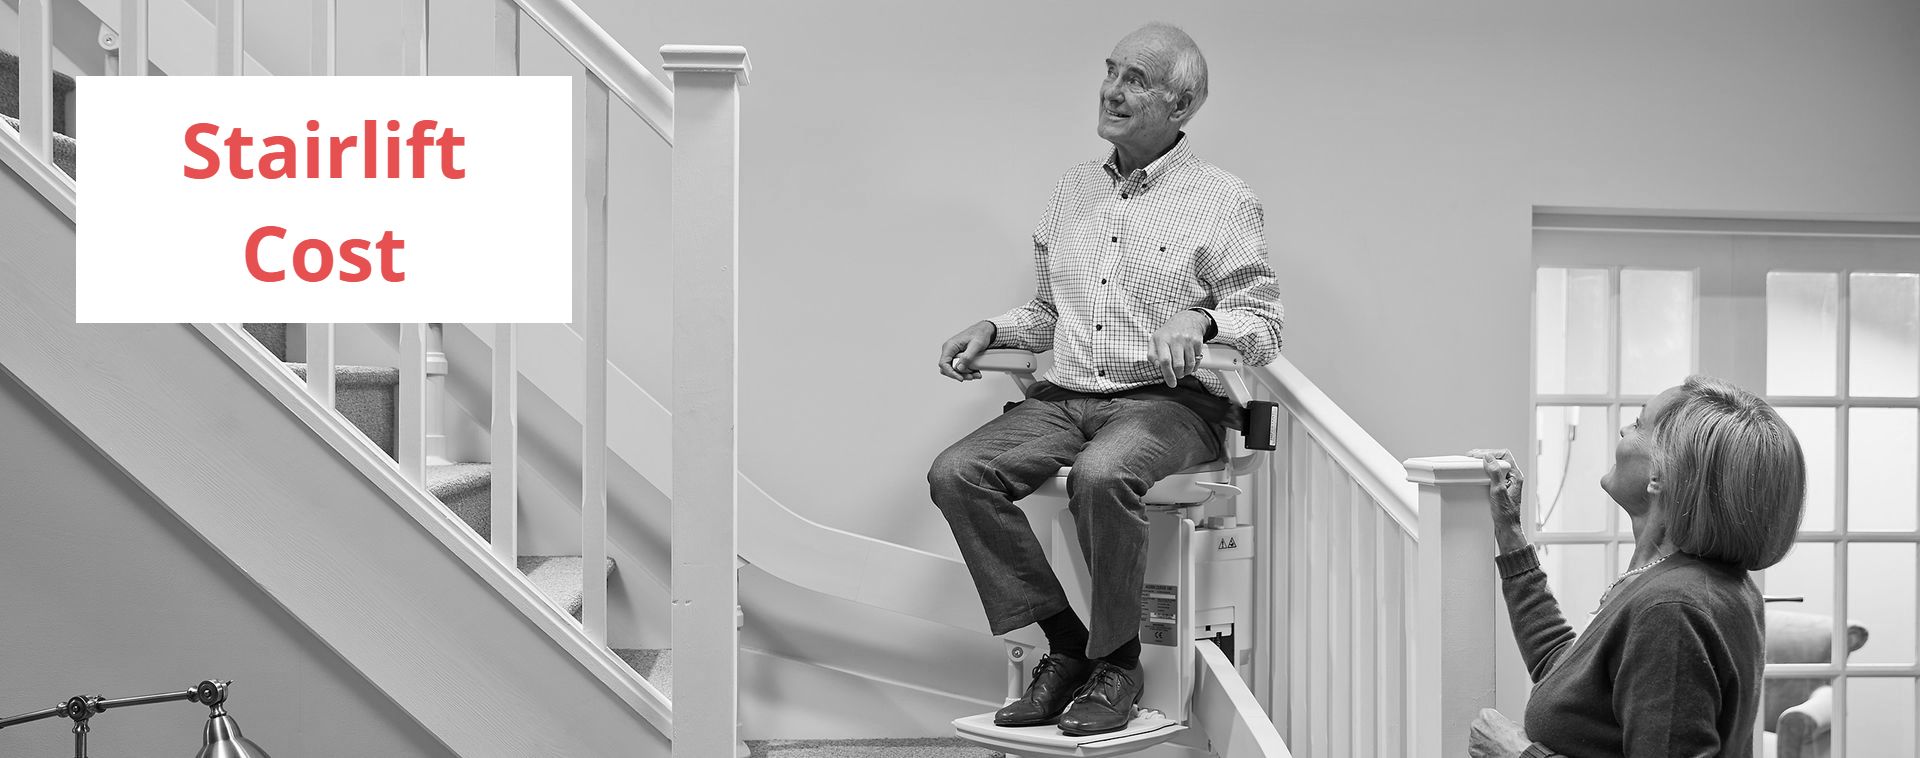 Stairlift Cost.